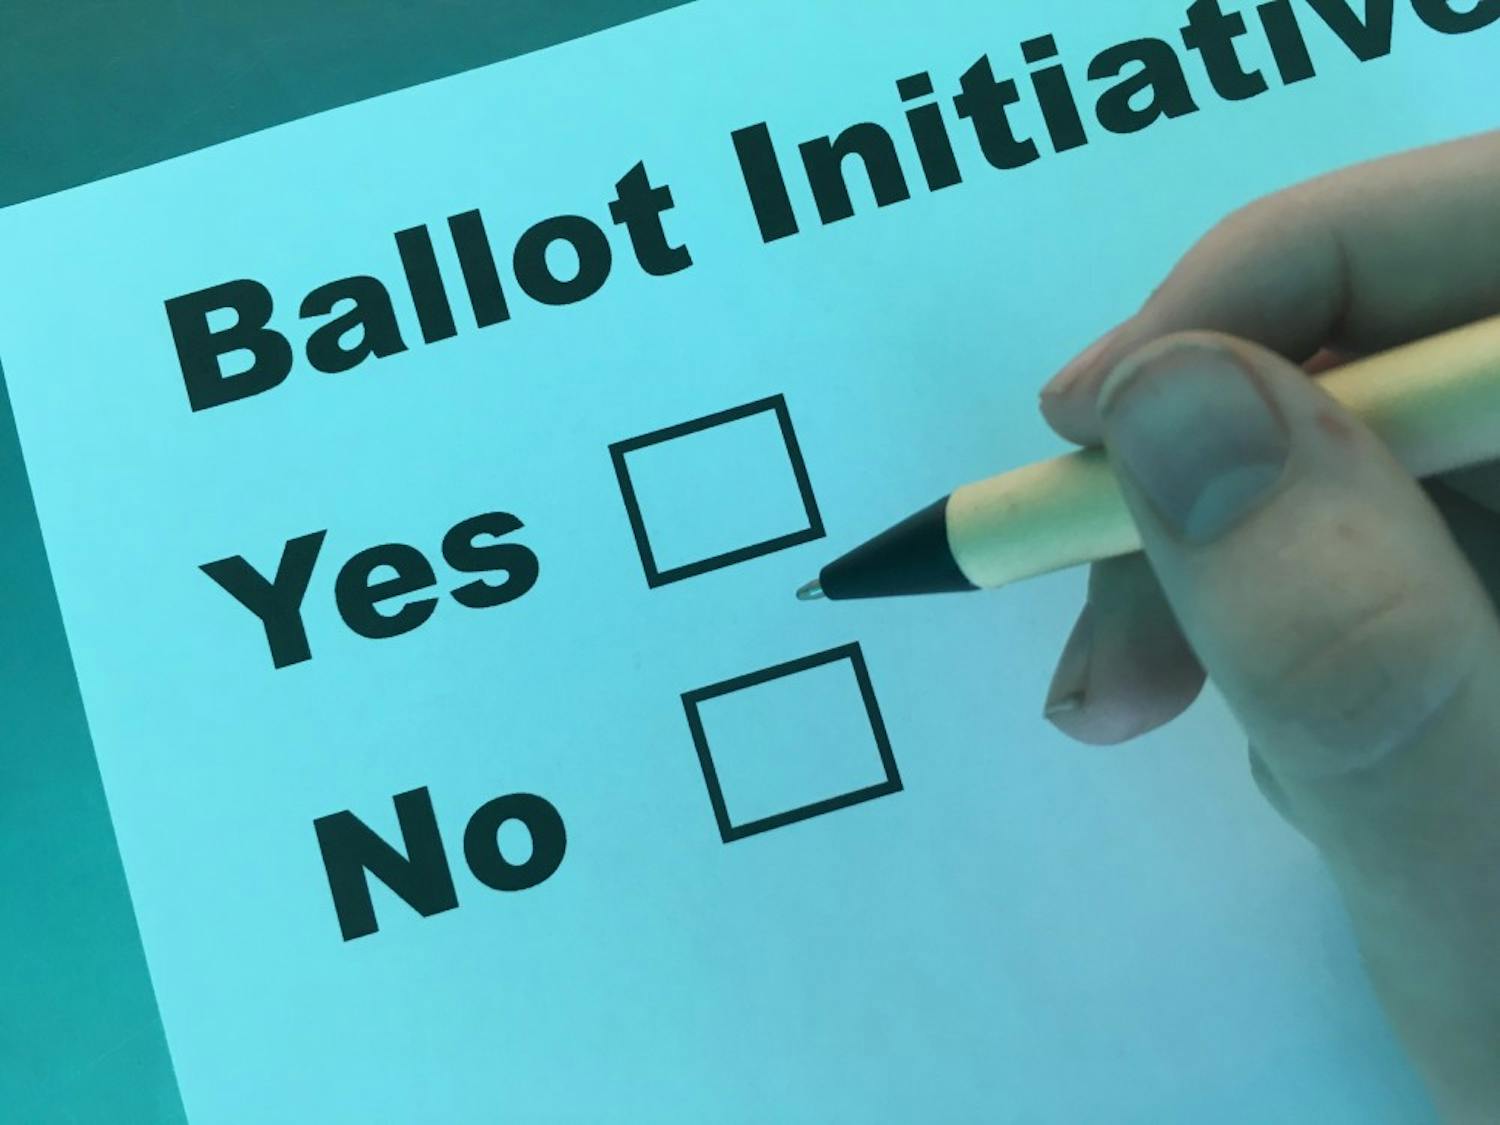 Ballot initiatives are guaranteed right under Arizona's constitution. Photo illustration published on Thursday, March 2, 2017.&nbsp;